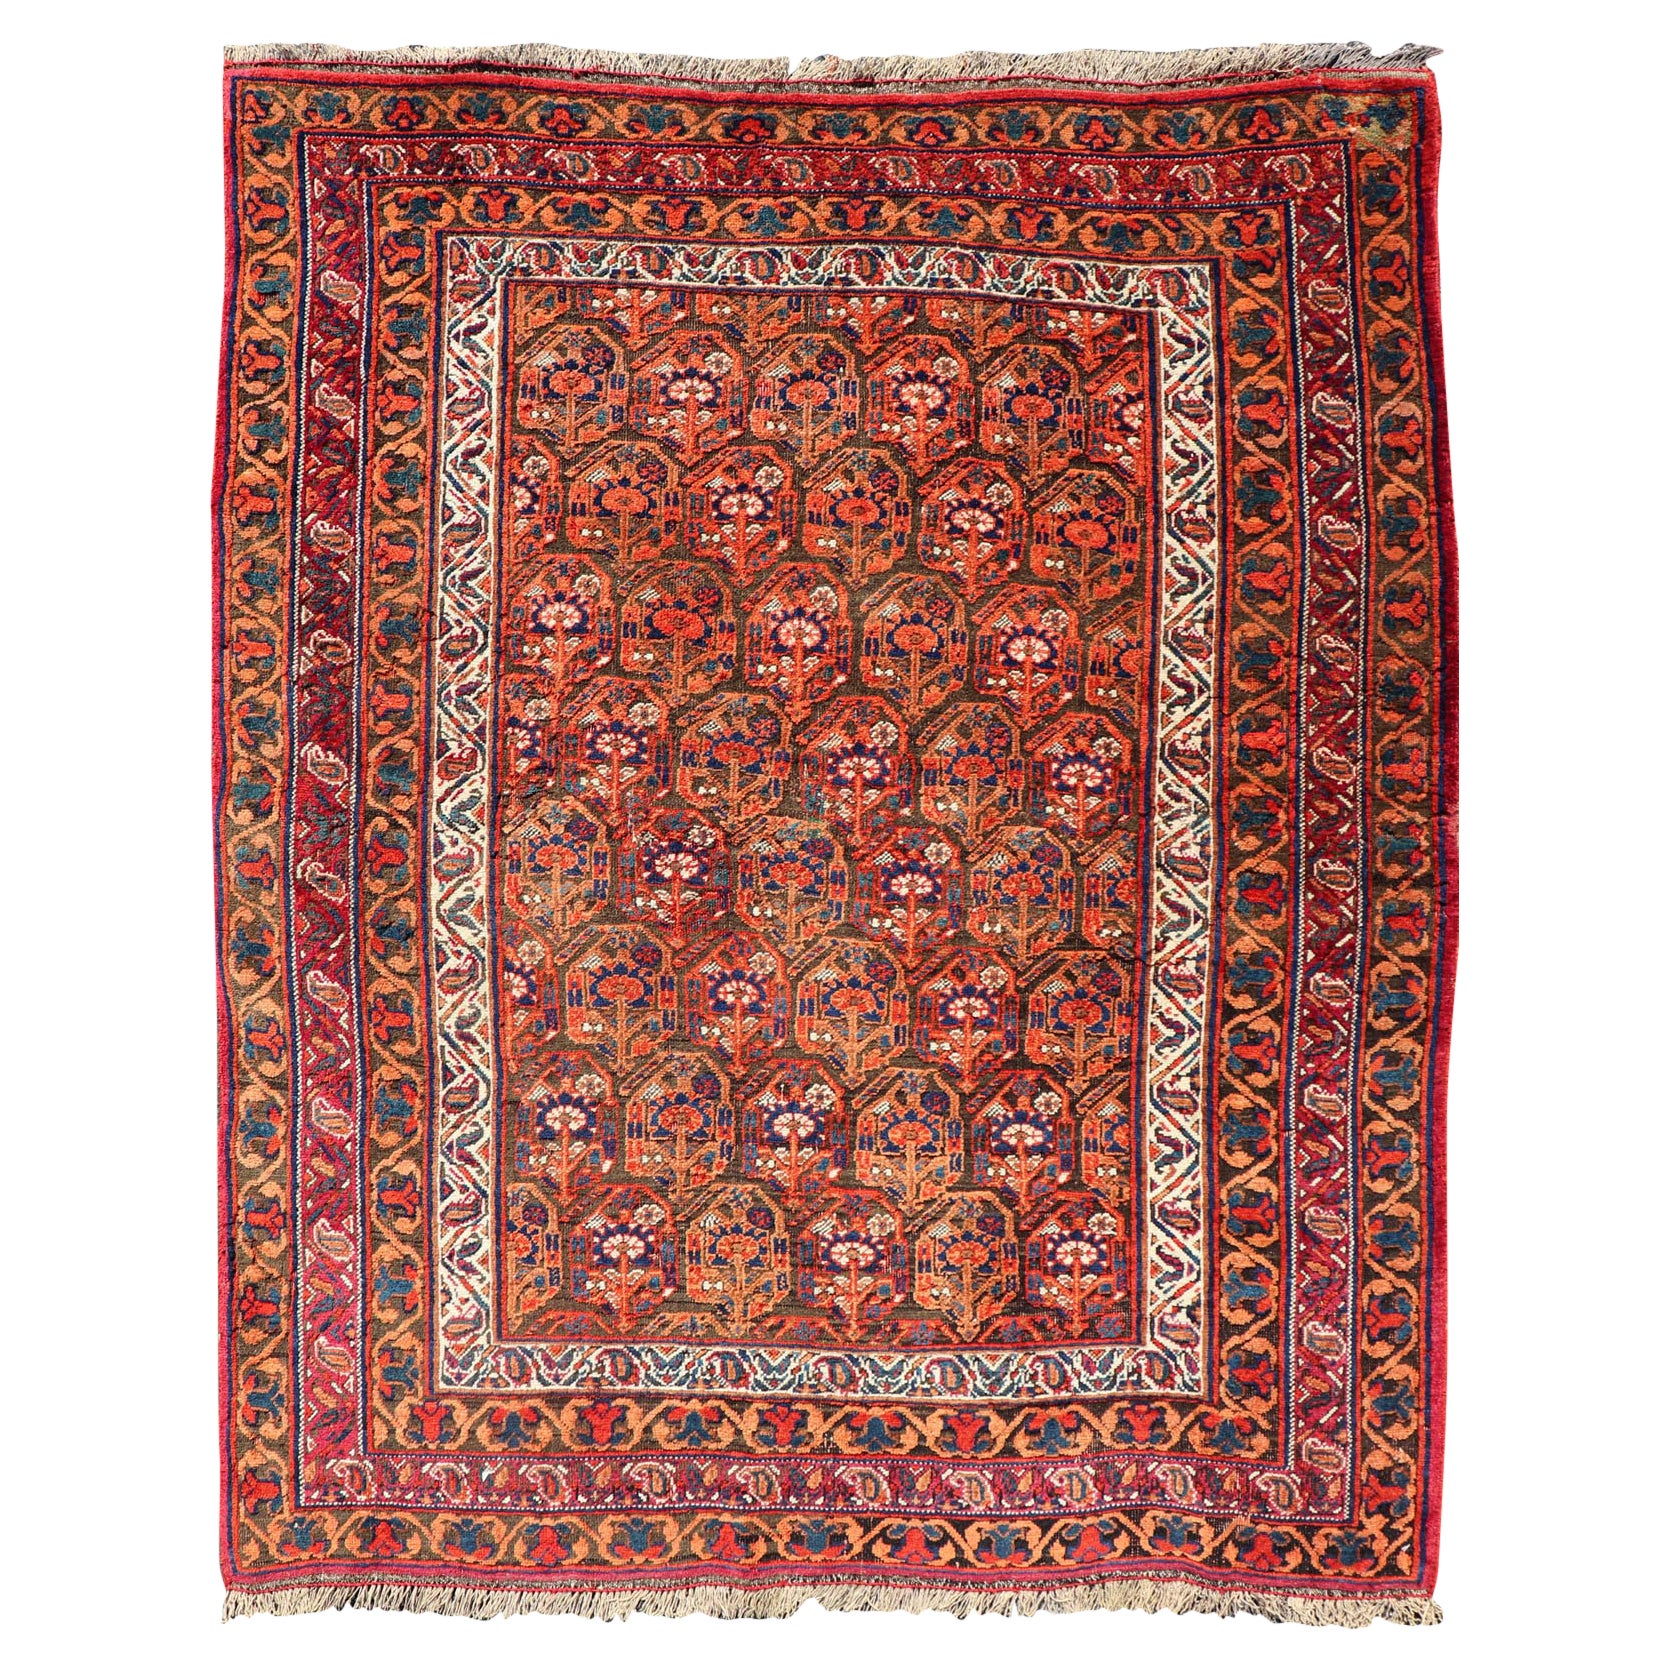  Fine Persian Antique Afshar Rug in Orange and Copper Background & Multi Colors